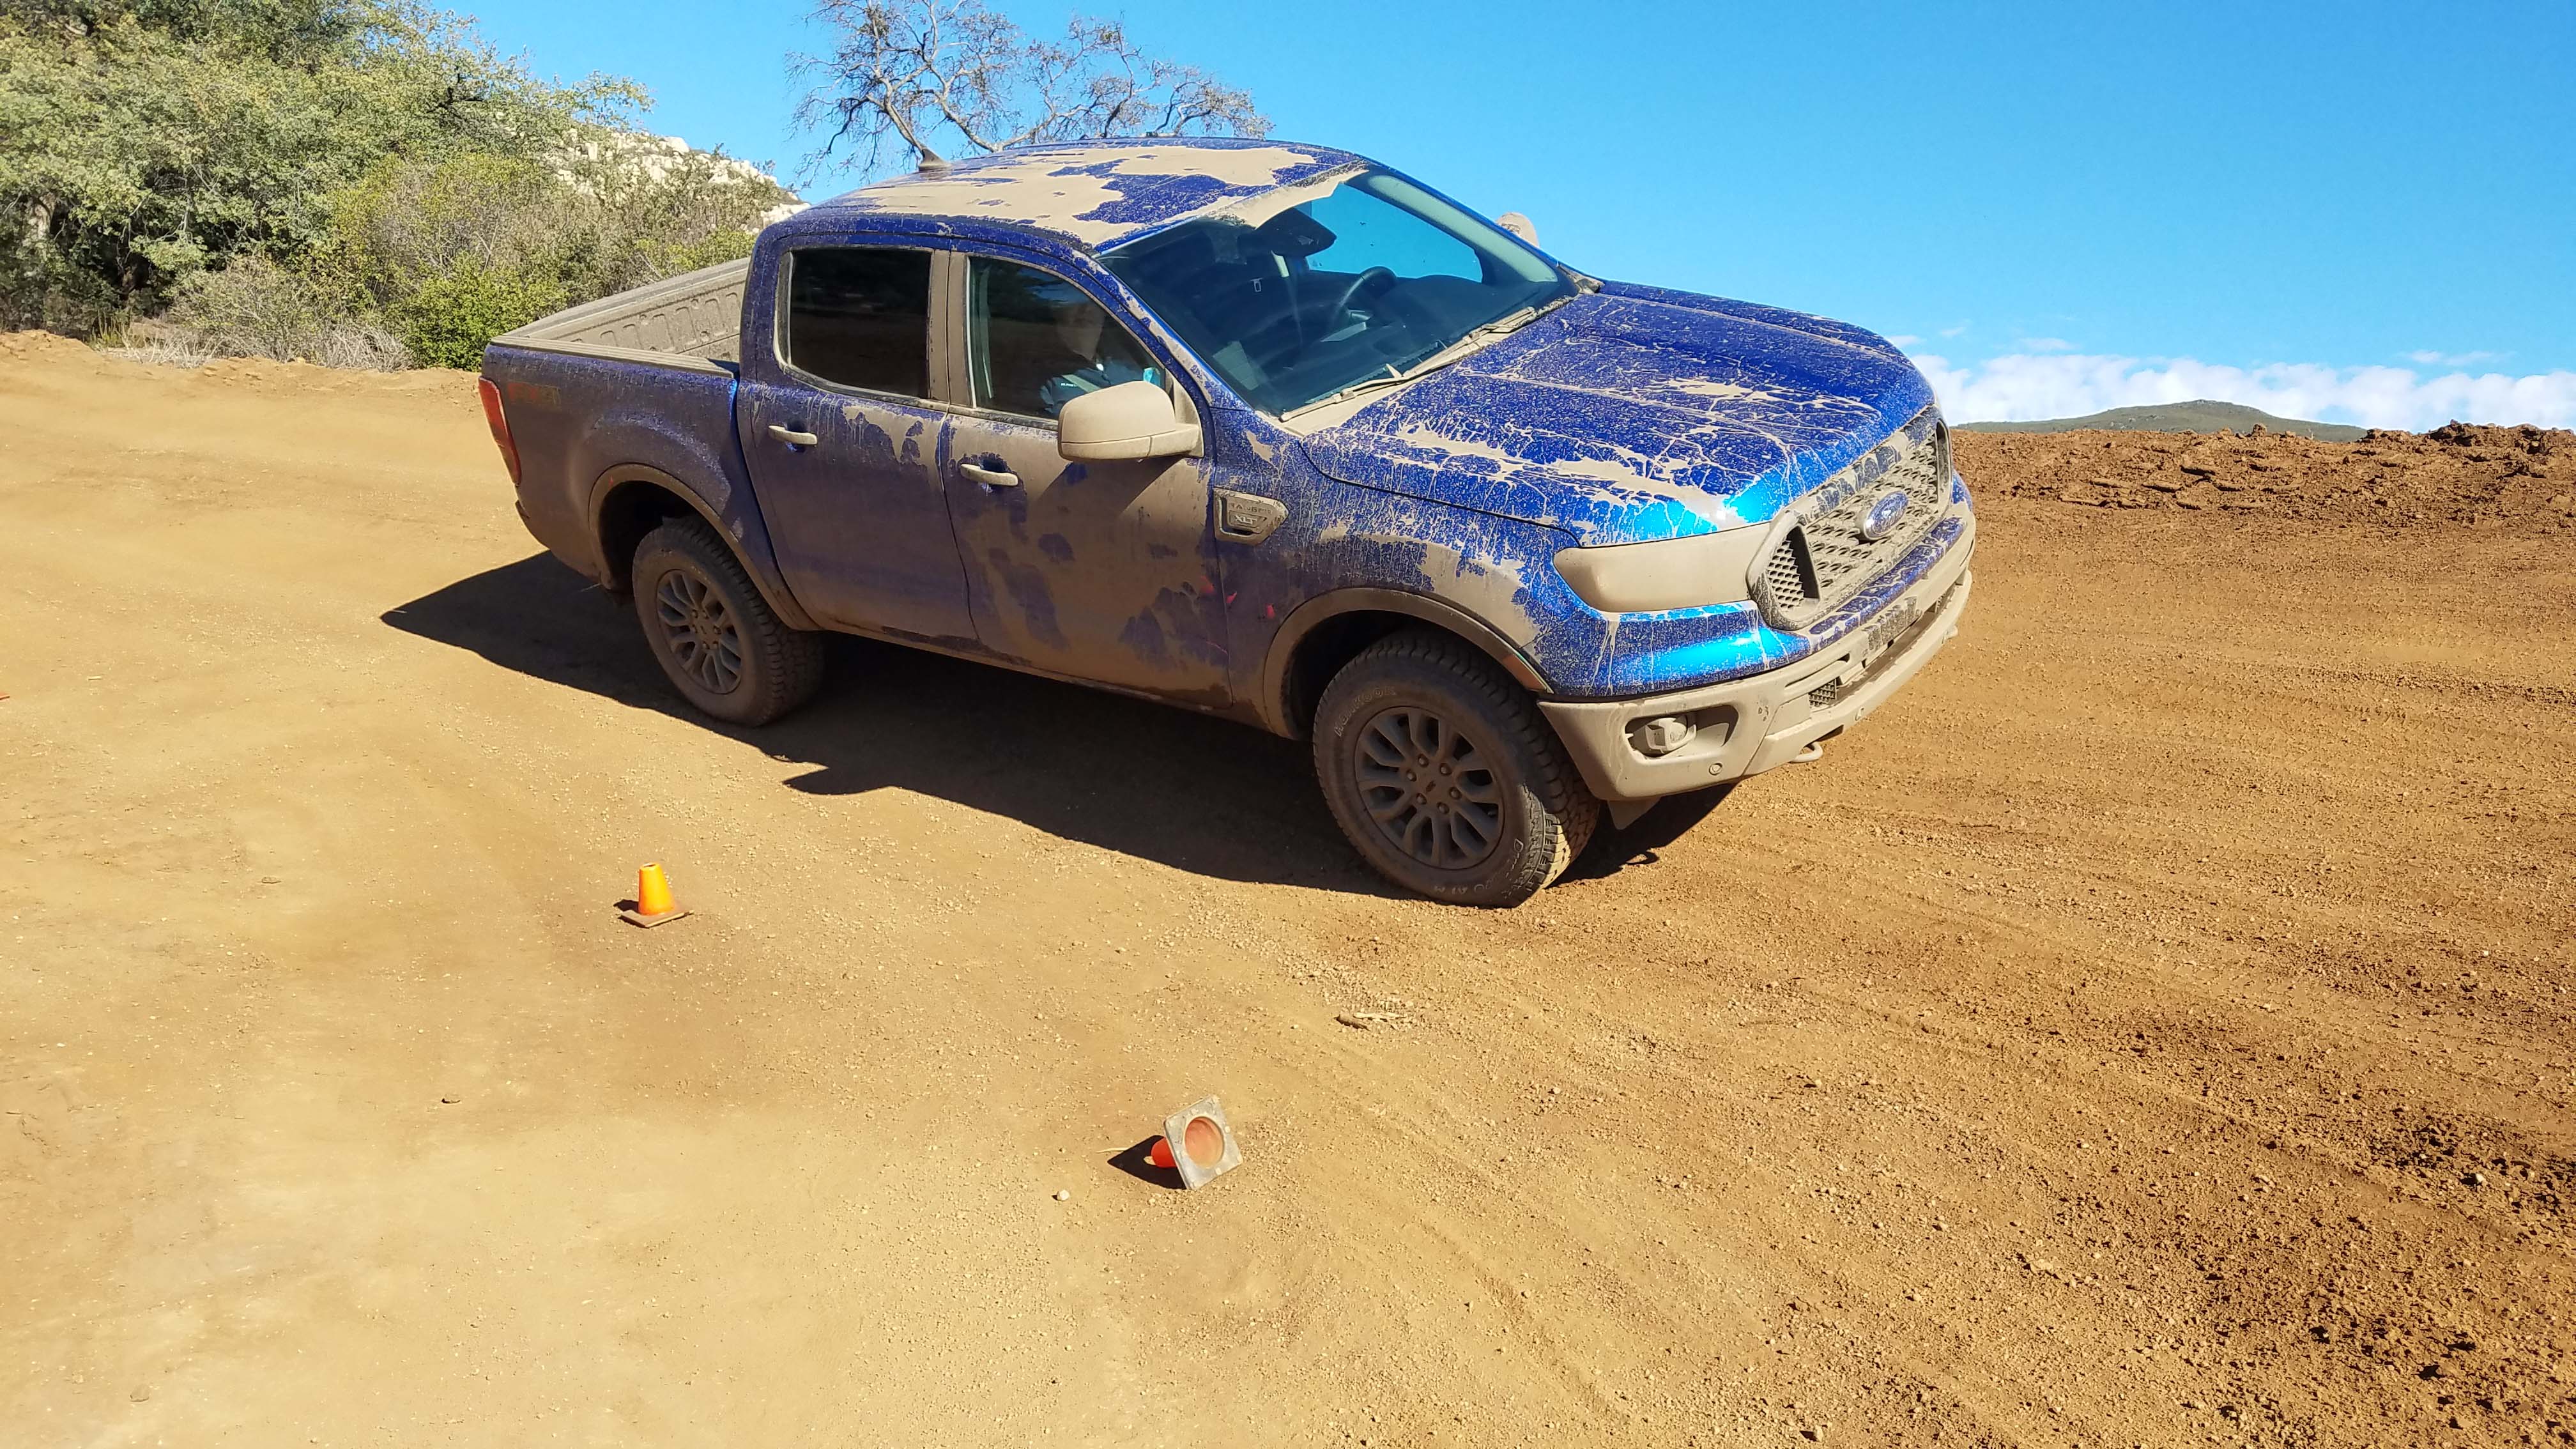 The 2019 Ford Ranger pickup is nimble on-road and tough off-road with a steel front bumper, locking rear diff and an FX4 package that includes steel skid plates.